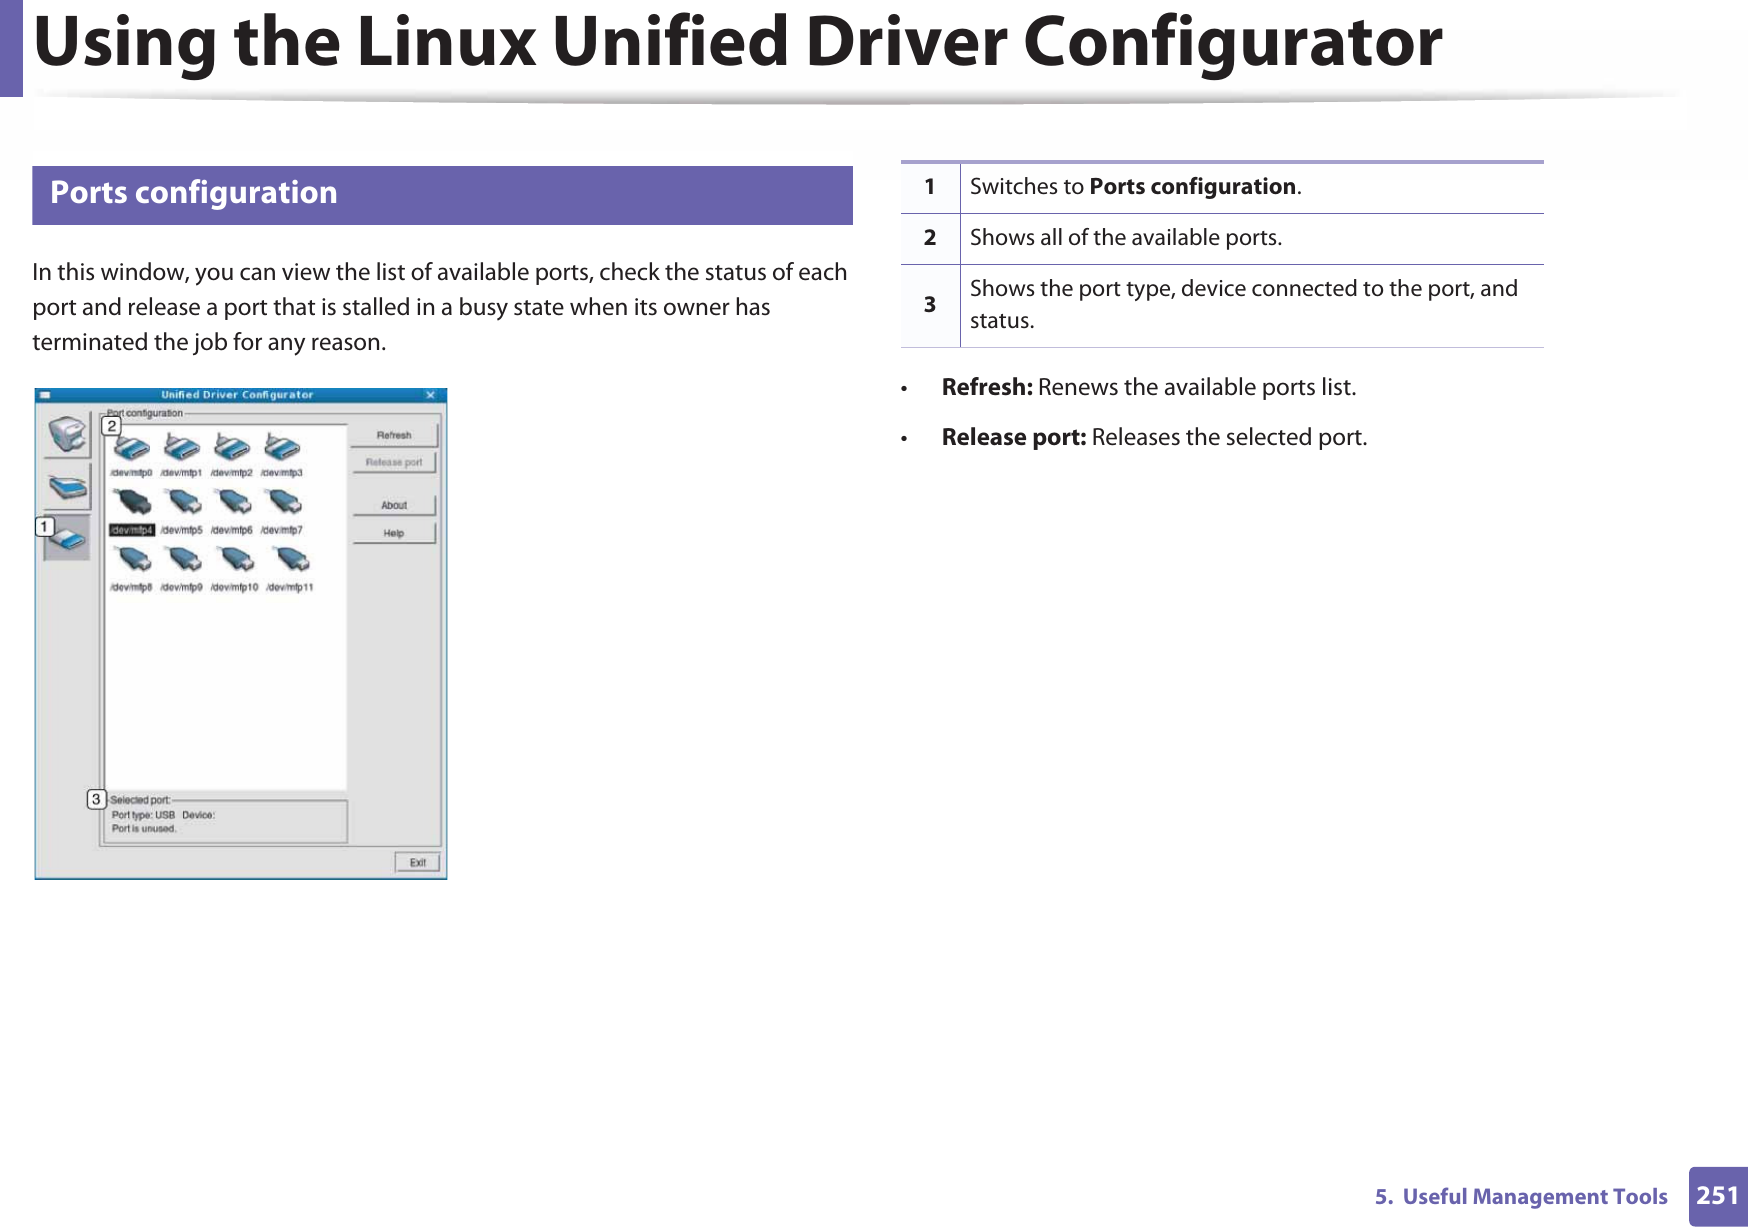 Using the Linux Unified Driver Configurator2515.  Useful Management Tools13 Ports configurationIn this window, you can view the list of available ports, check the status of each port and release a port that is stalled in a busy state when its owner has terminated the job for any reason.•Refresh: Renews the available ports list.•Release port: Releases the selected port.1Switches to Ports configuration.2Shows all of the available ports.3Shows the port type, device connected to the port, and status.